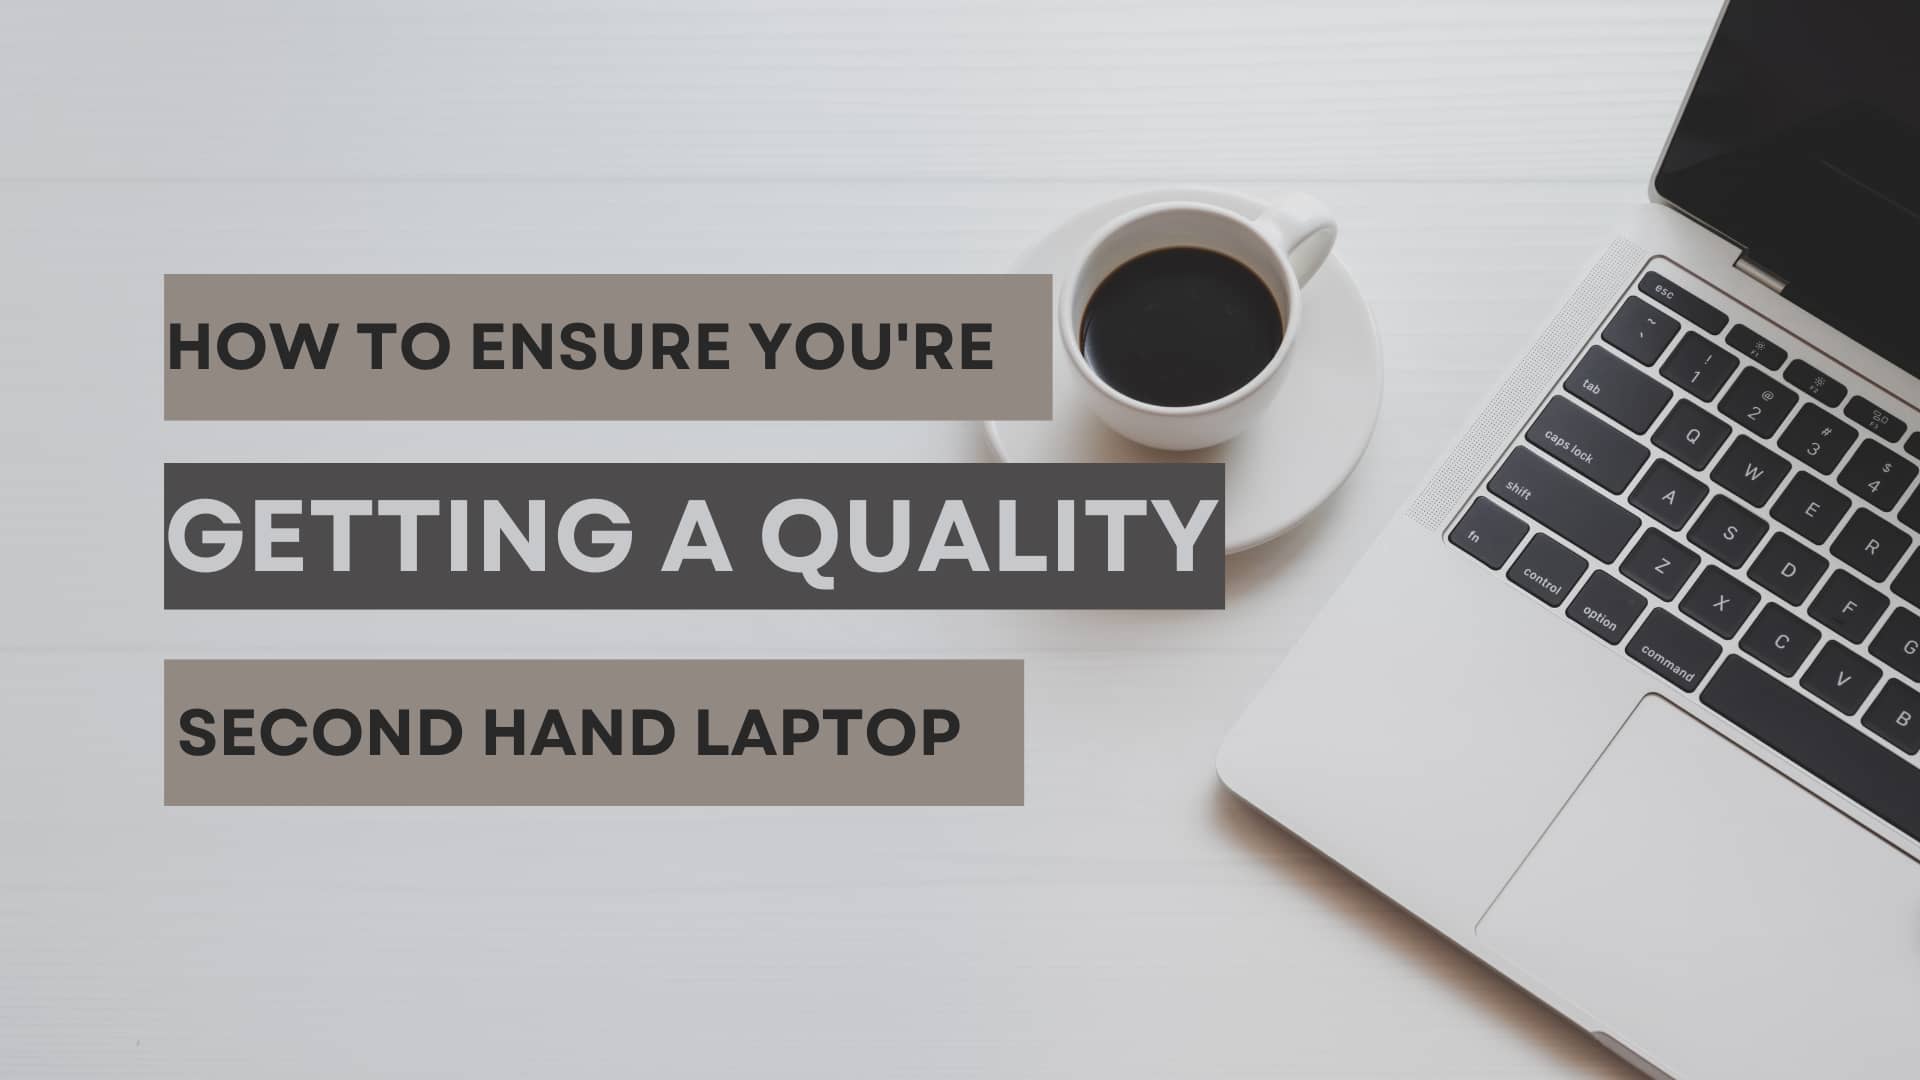 How to Ensure You're Getting a Quality Second Hand Laptop